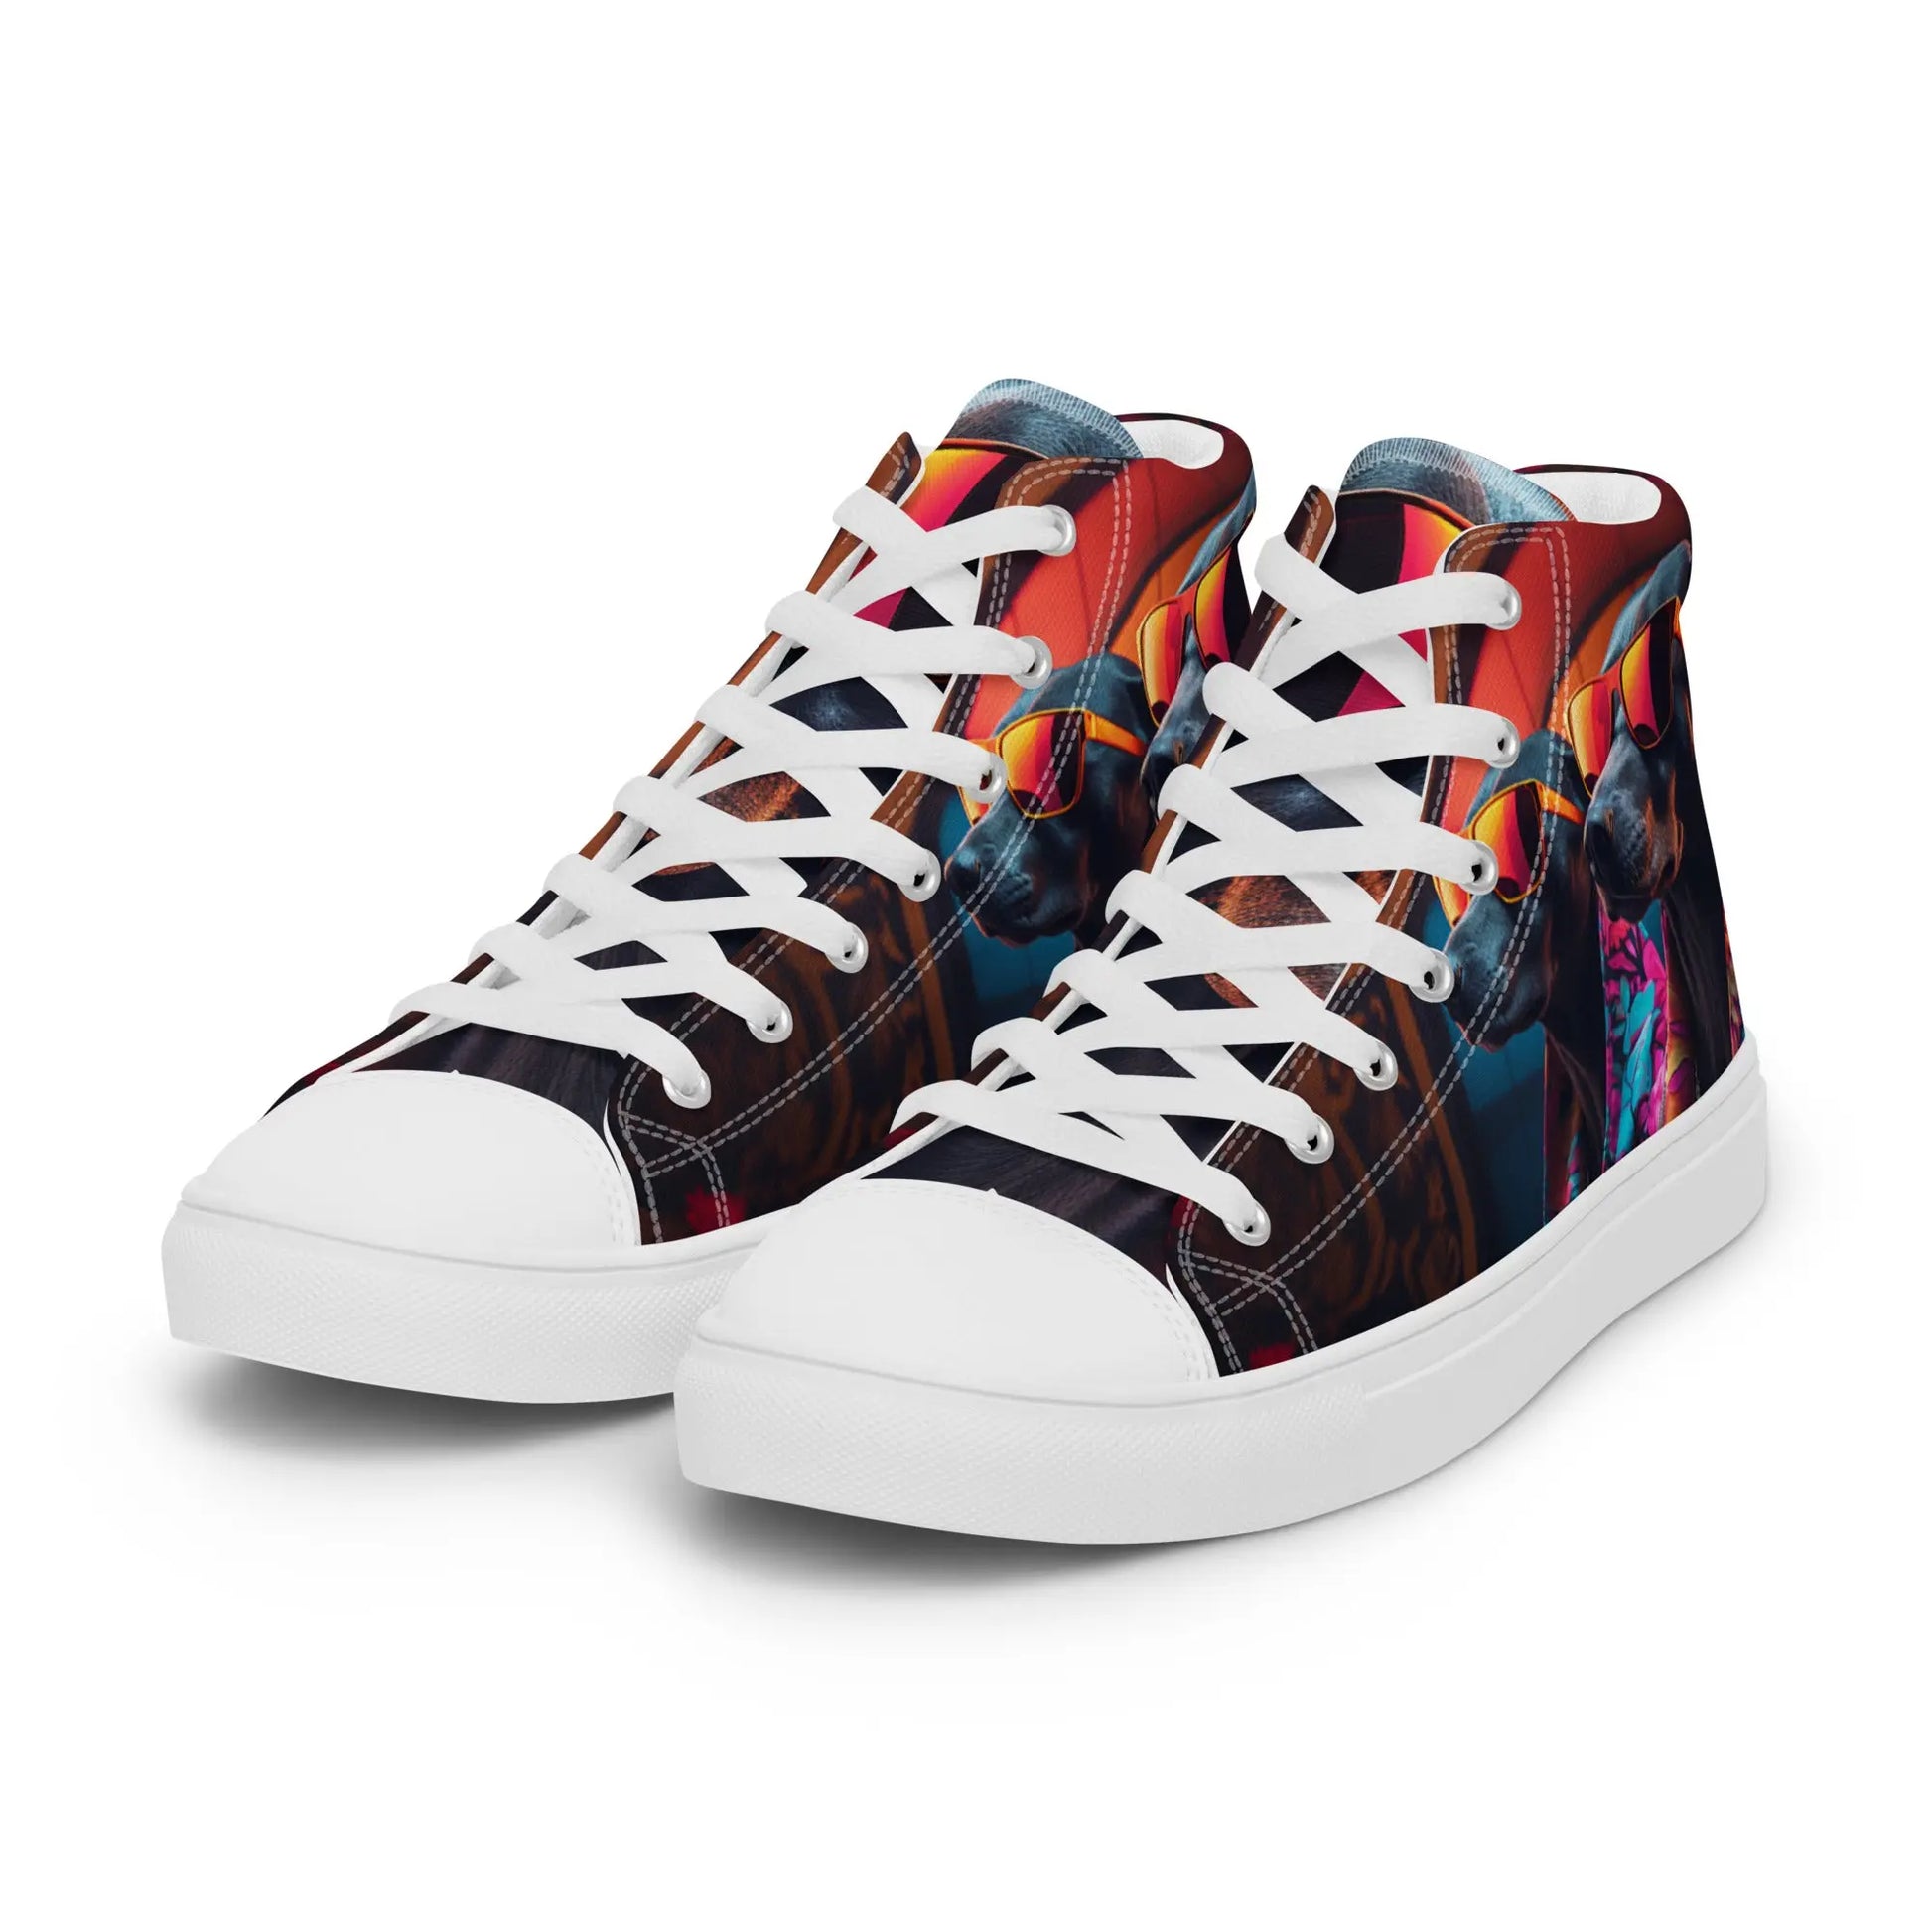 Vibrant Whimsy Suburban Garden Dog High Top Sneakers - AI-Engineered Unisex Footwear with Synthwave Flair and Whimsical Ankara Design Kinetic Footwear